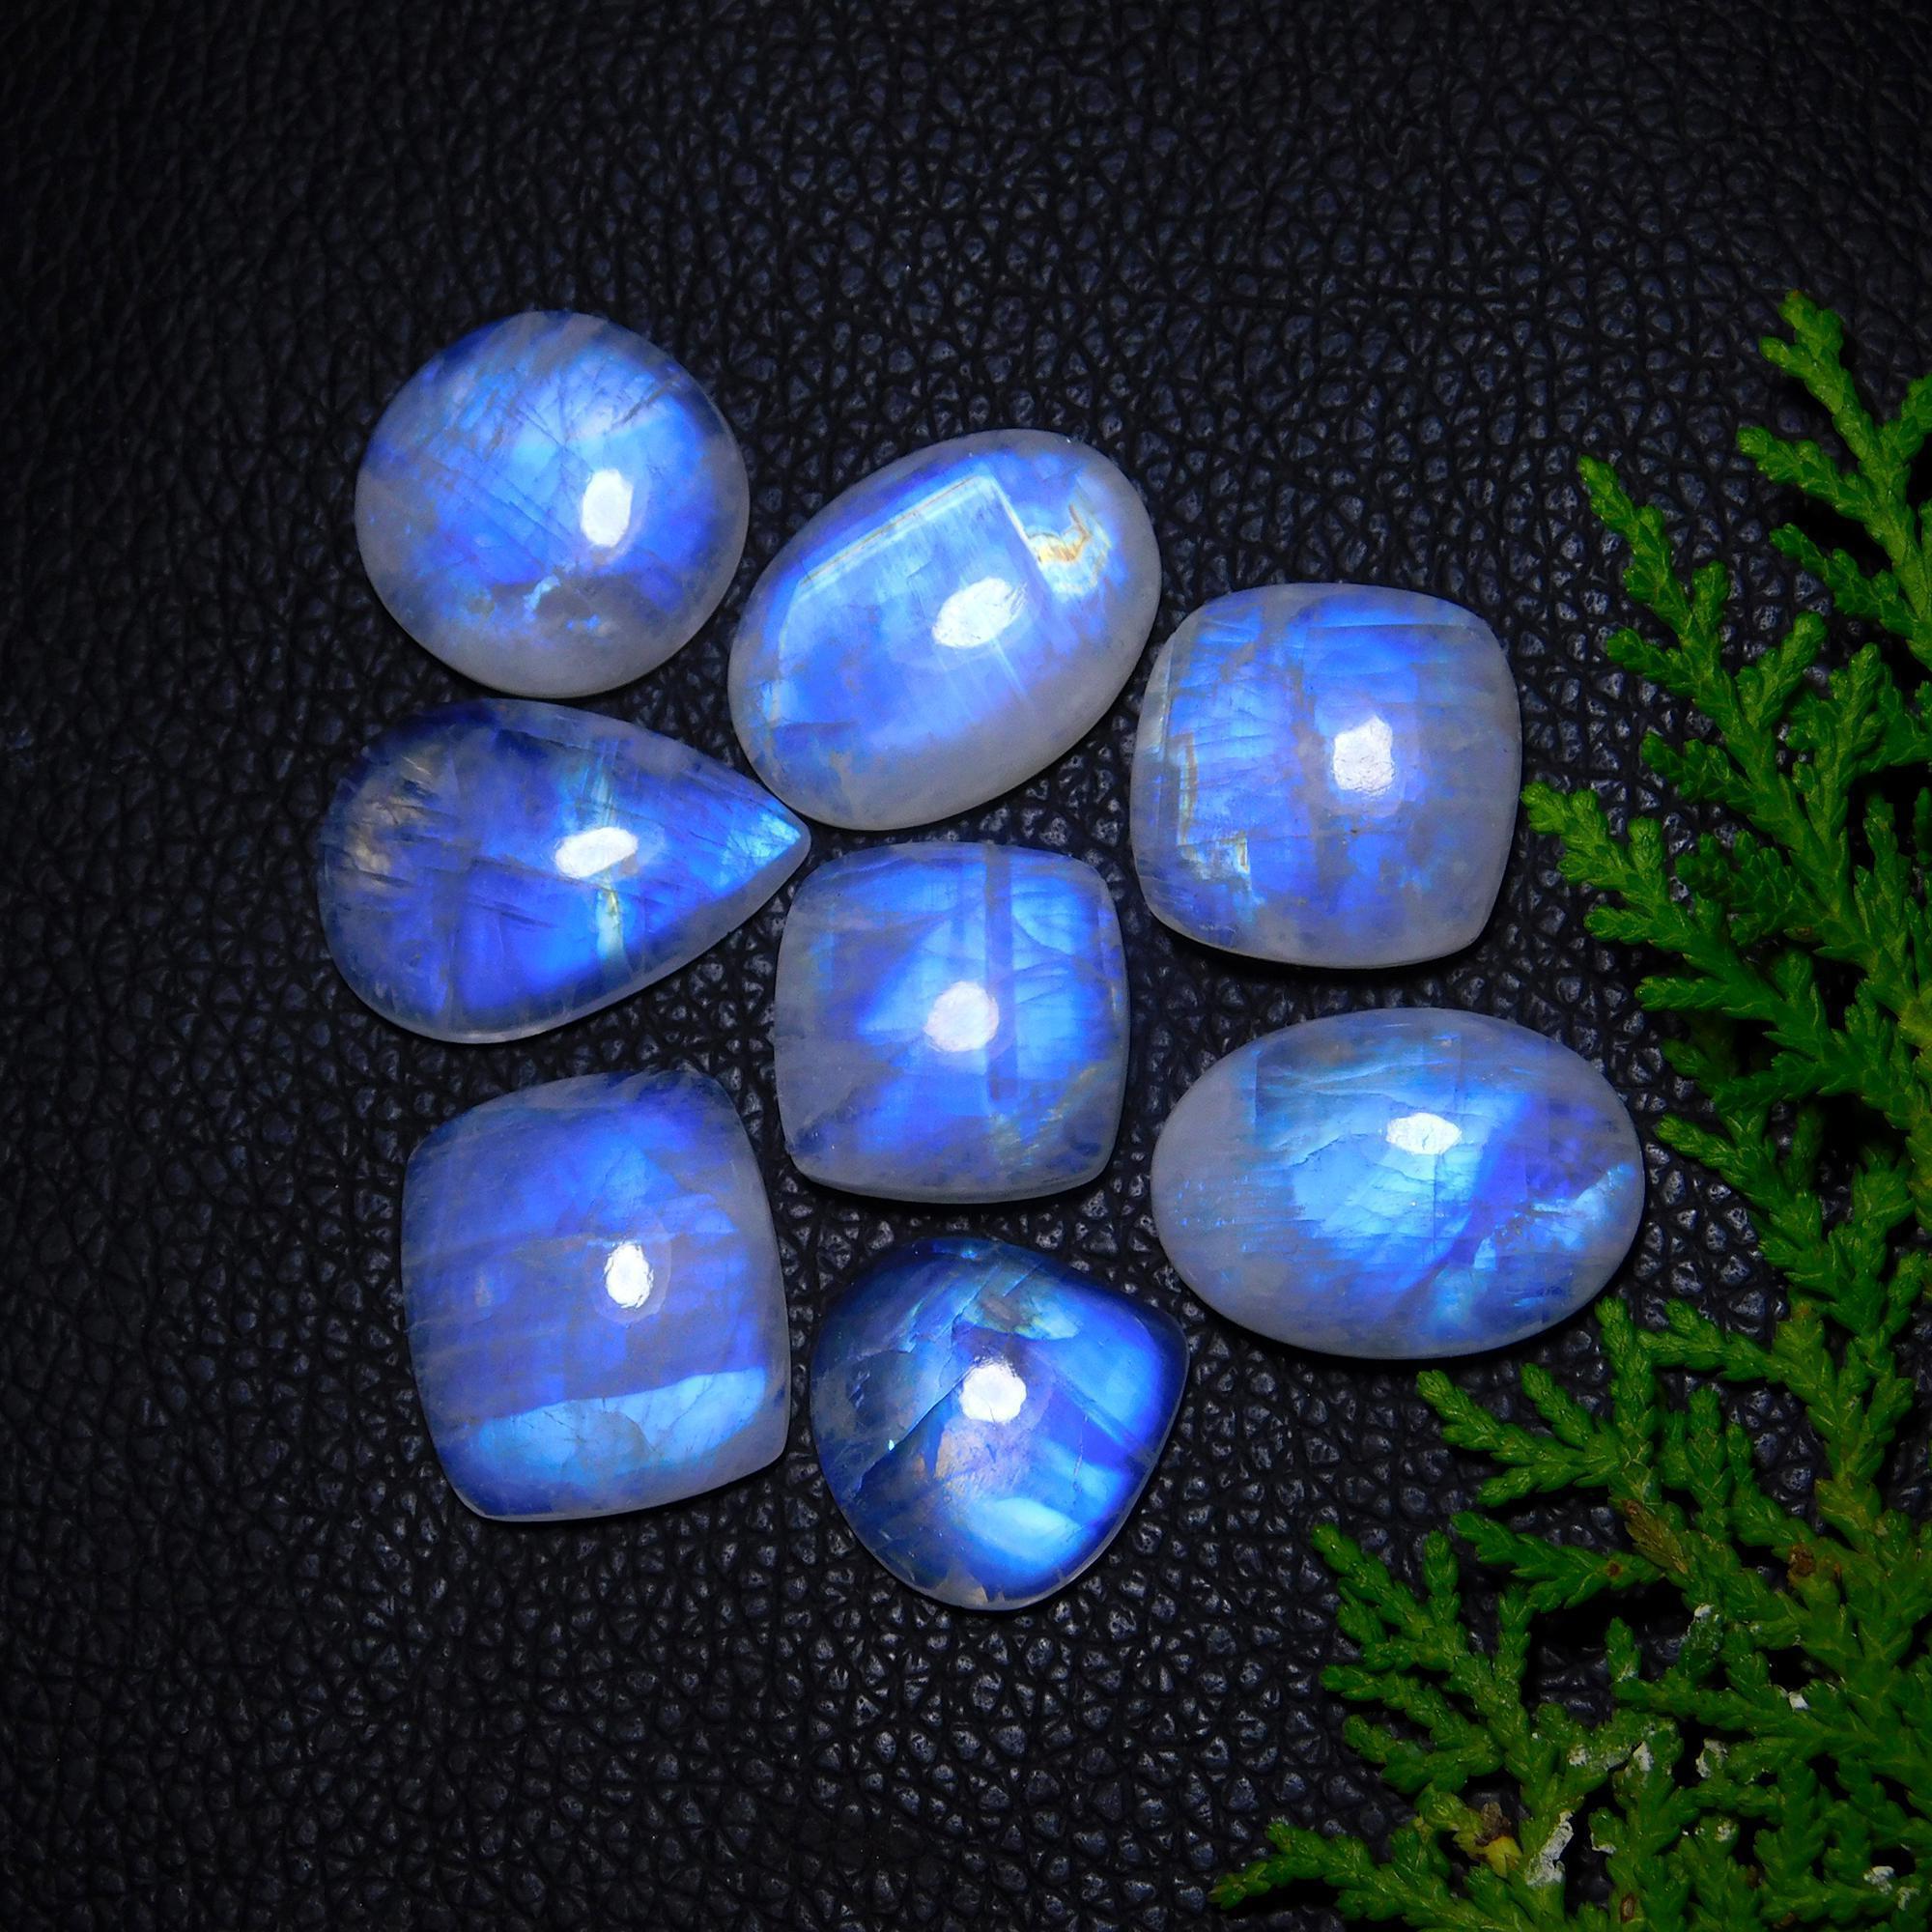 8Pcs 145Cts Natural Rainbow Moonstone Cabochon Blue Fire Loose Gemstone Crystal jewelry supplies wholesale lot gift for her Black Friday 24X17 18X18mm#9423